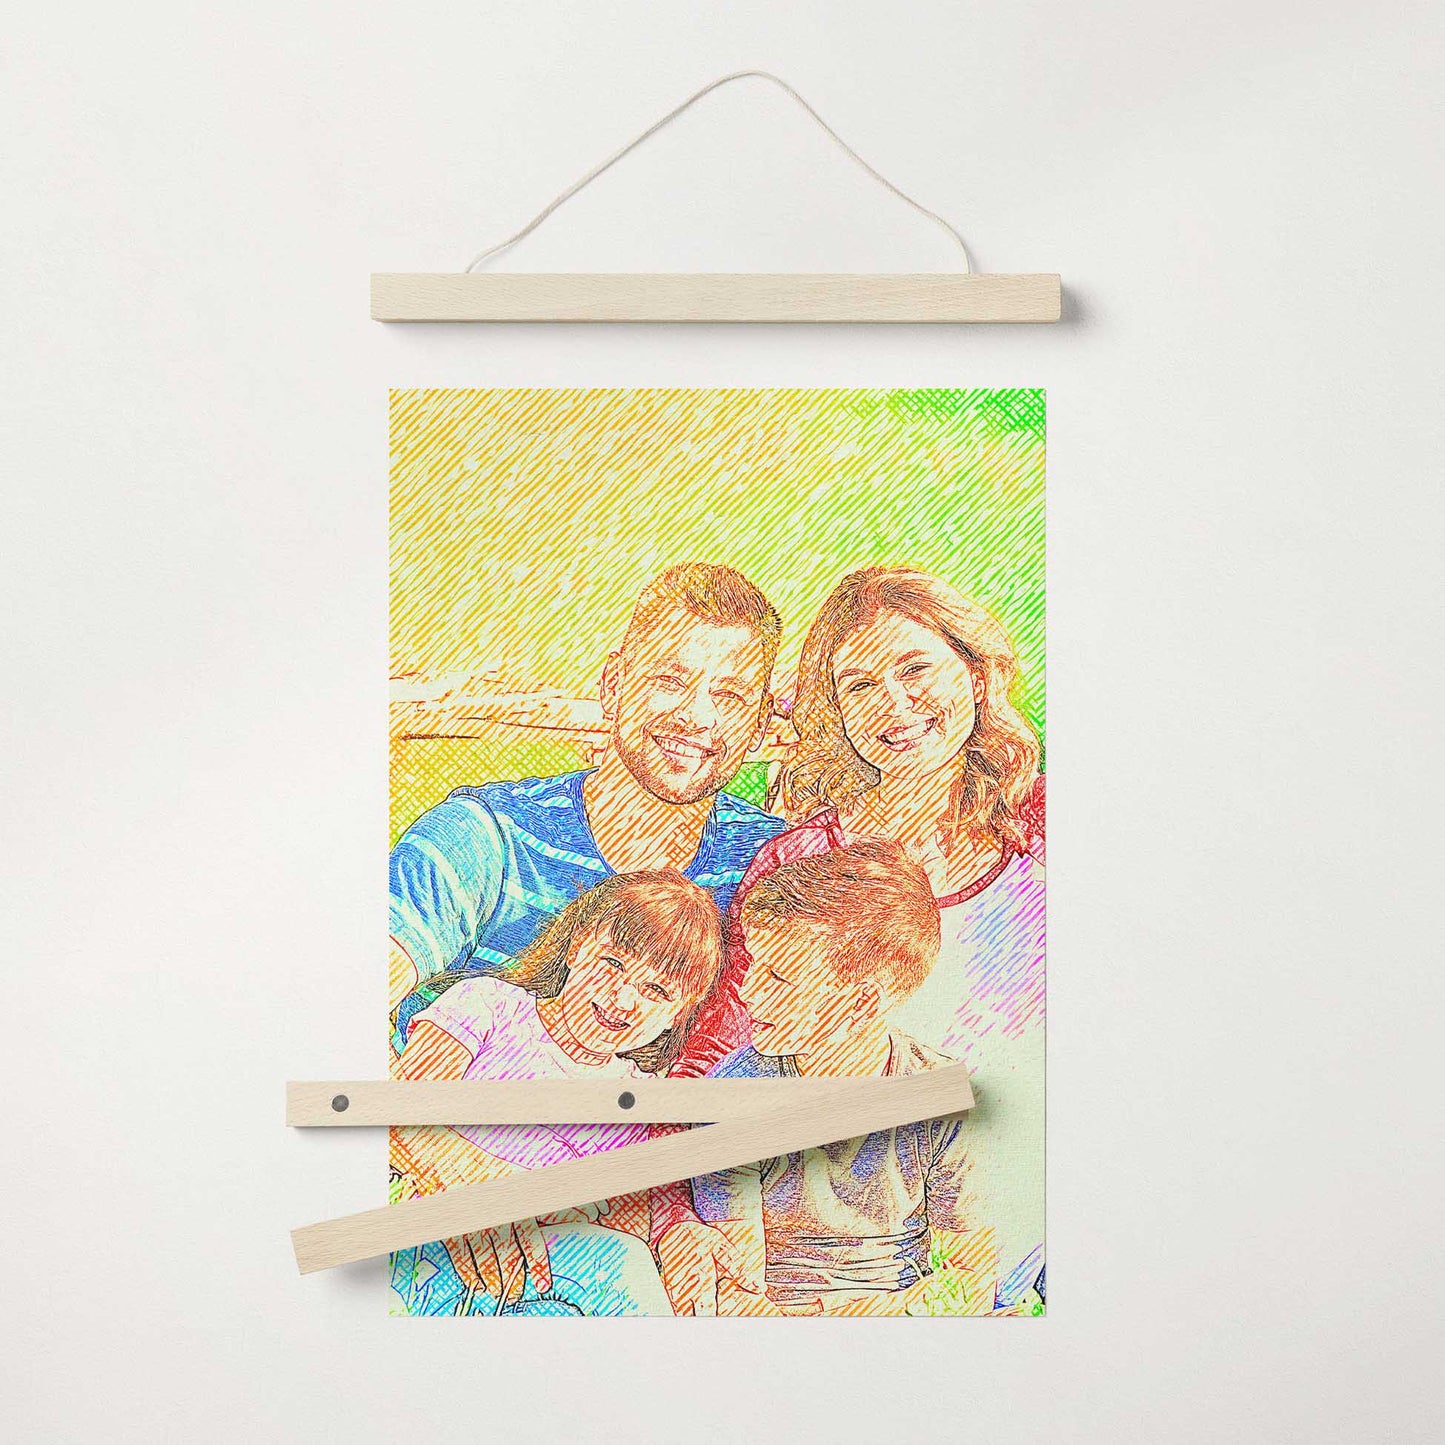 Creative Interior Design: Enhance your interior design with the creative and inspirational presence of our Personalised Drawing Crosshatch Poster Hanger. The vivid colors, joyful vibes, and crosshatch texture effect bring a unique flair to home